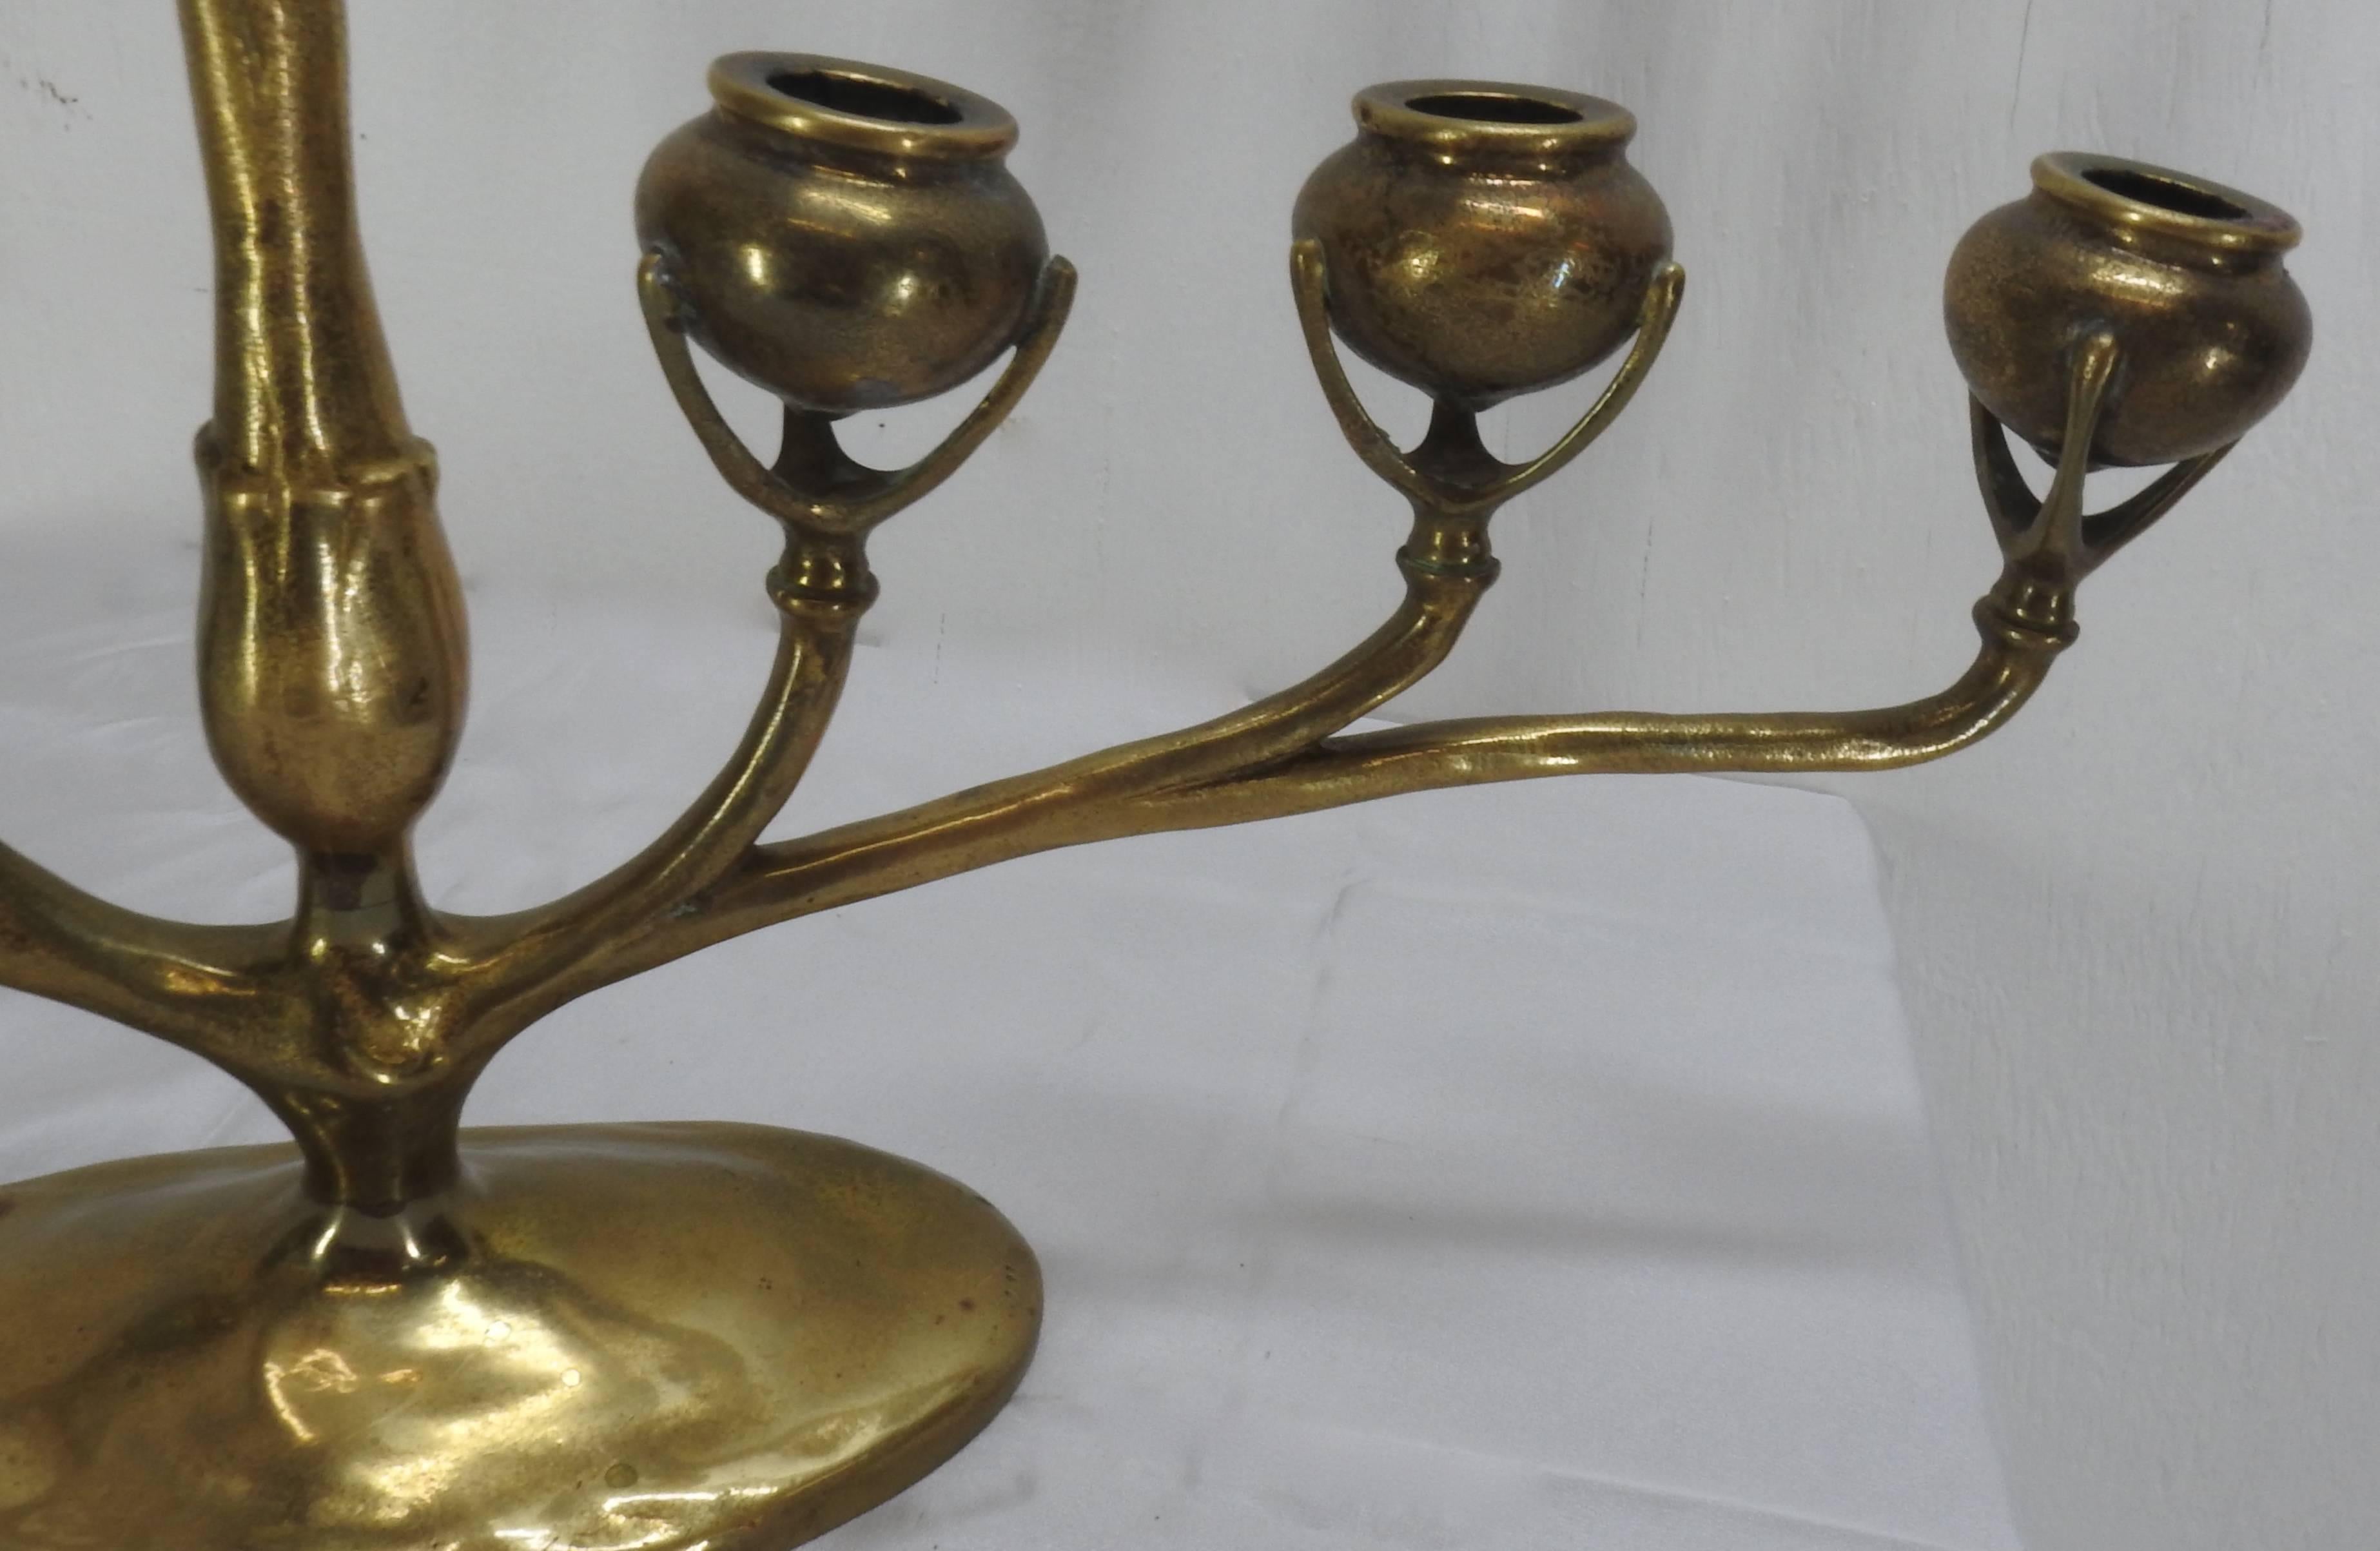 A lovely Tiffany gilt bronze six-arm candelabra from the Art Nouveau period. Six candle sconces are raised on supports. Each piece is supported on branches that are attached to two arms, one on each side of the main stem, all raised on an elongated